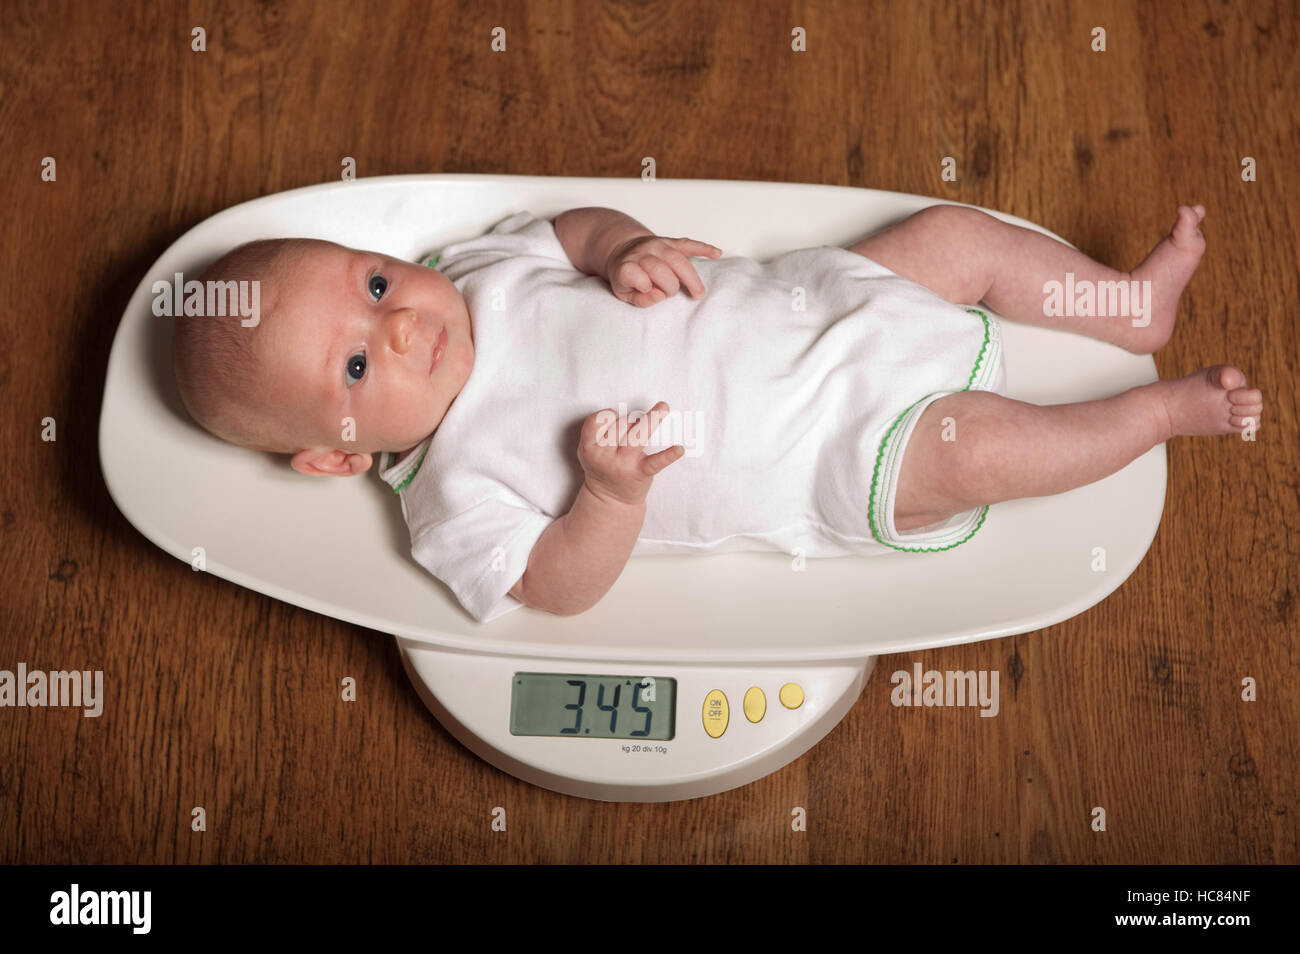 Closeup of 1 Months Old Newborn Baby Boy Lying on Digital Scales or Weighs.  Concept of Babies and Newborn Hygiene and Stock Photo - Image of growth,  girl: 208995290